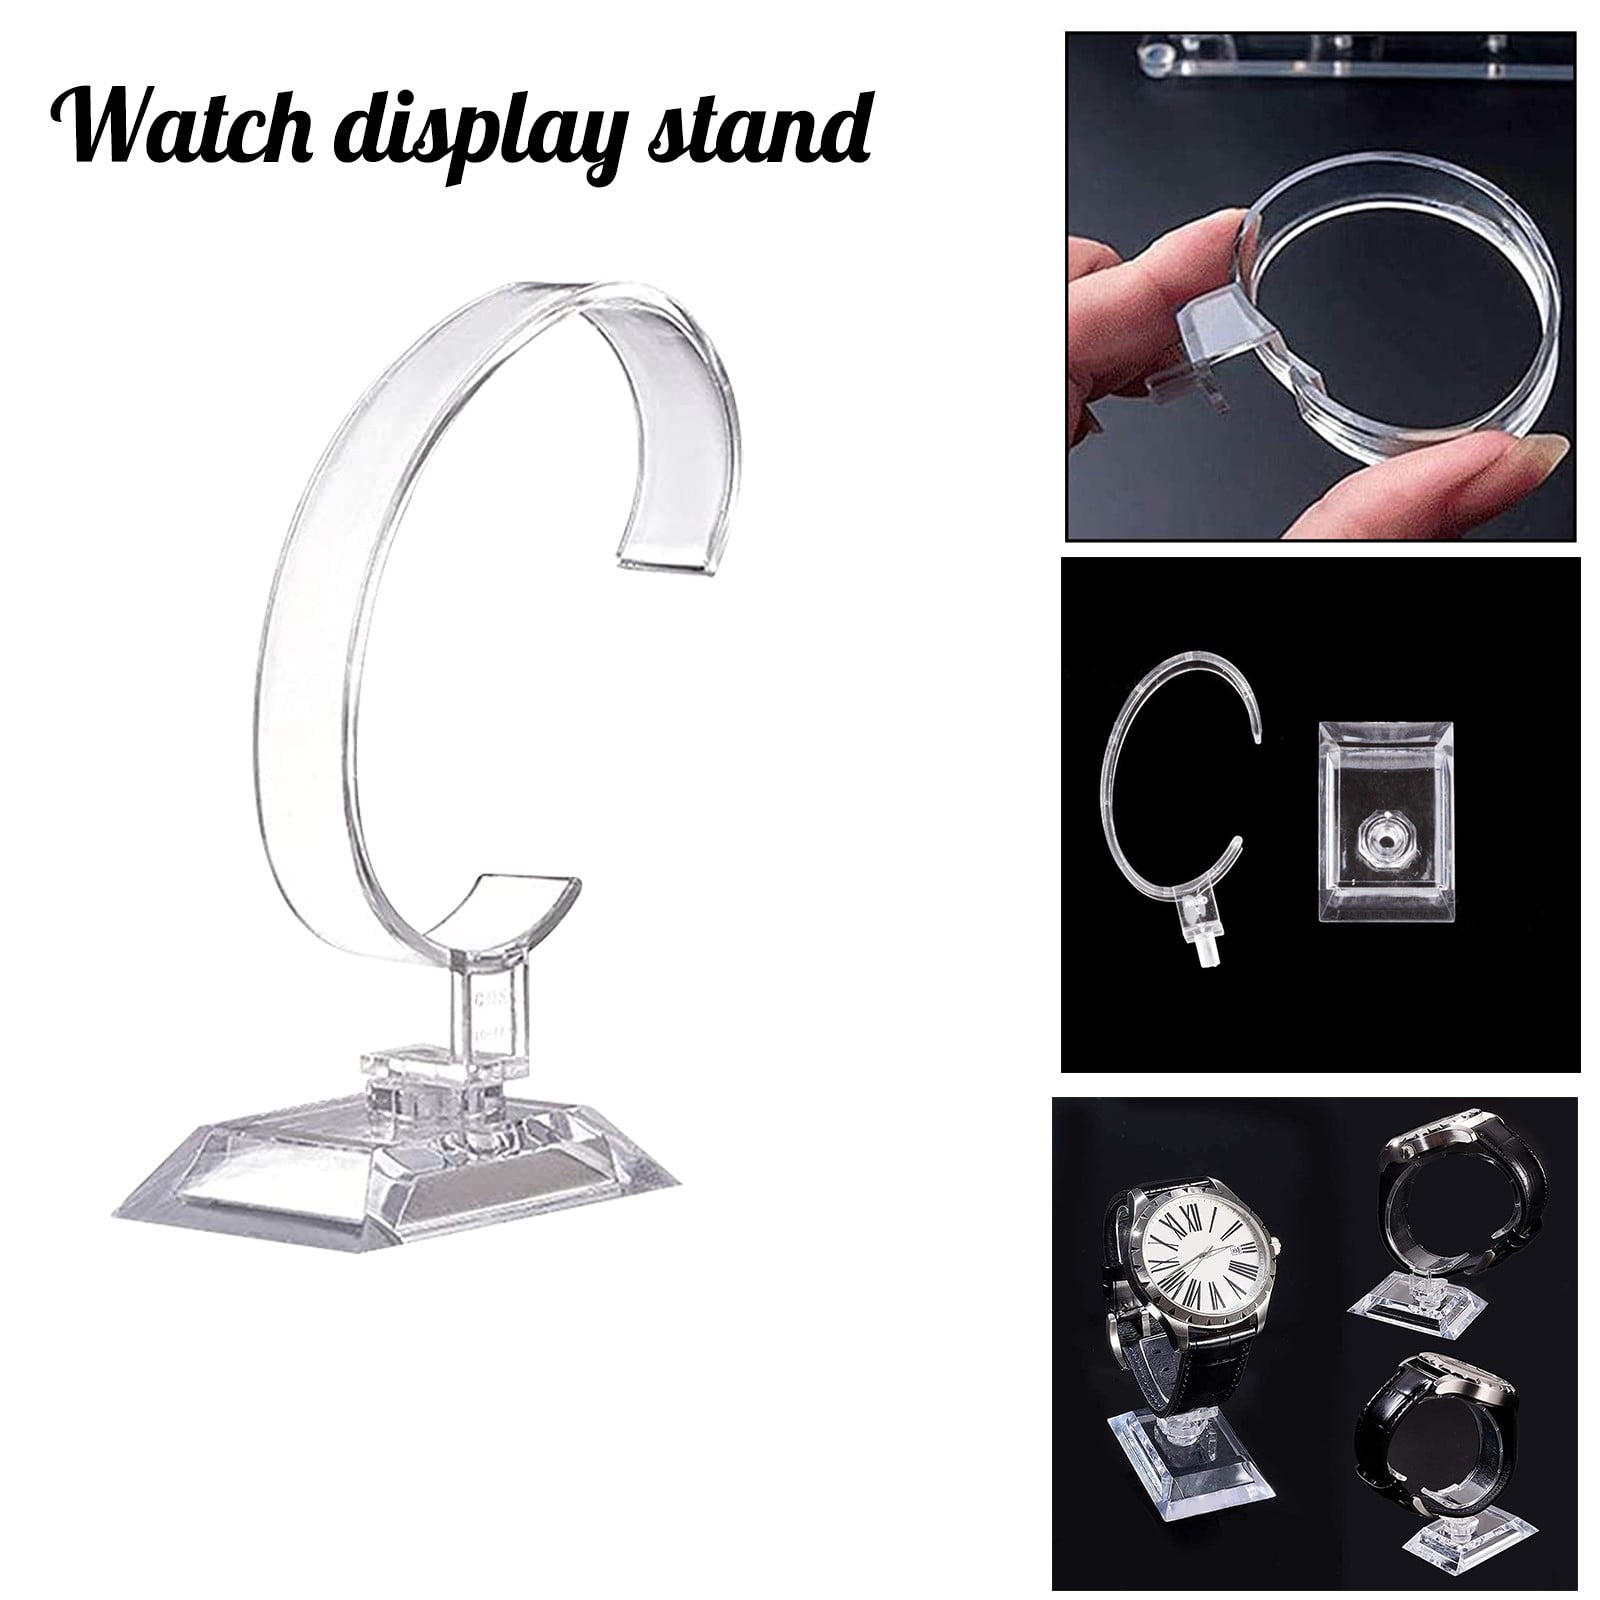 WATCHPOD Watch Display Stand